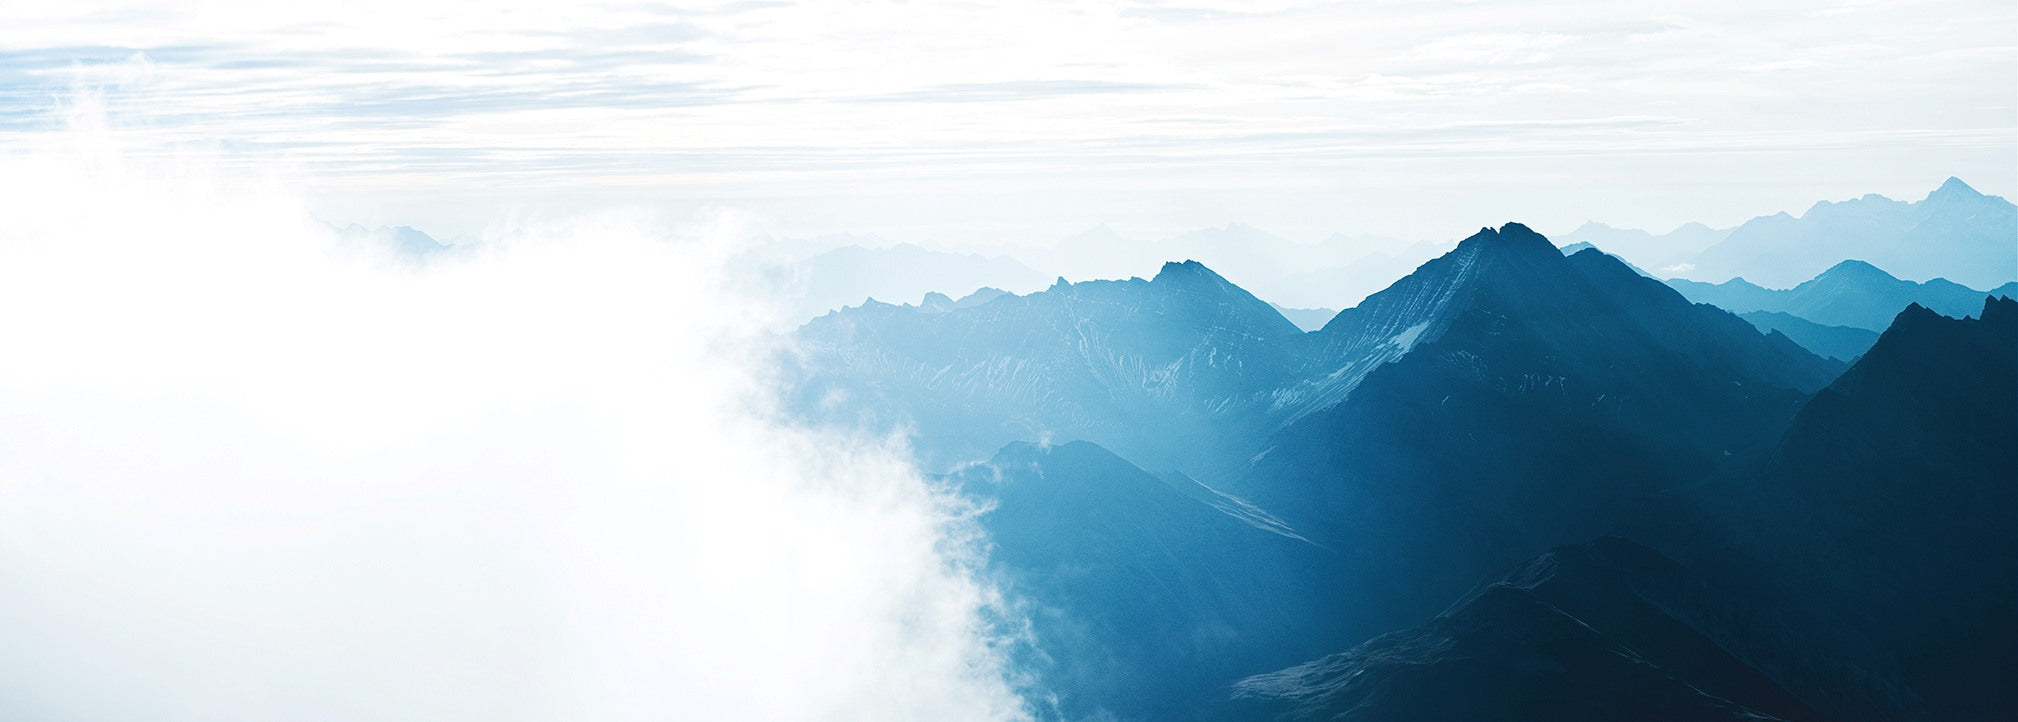 inspiration photo with a mountain view in fog